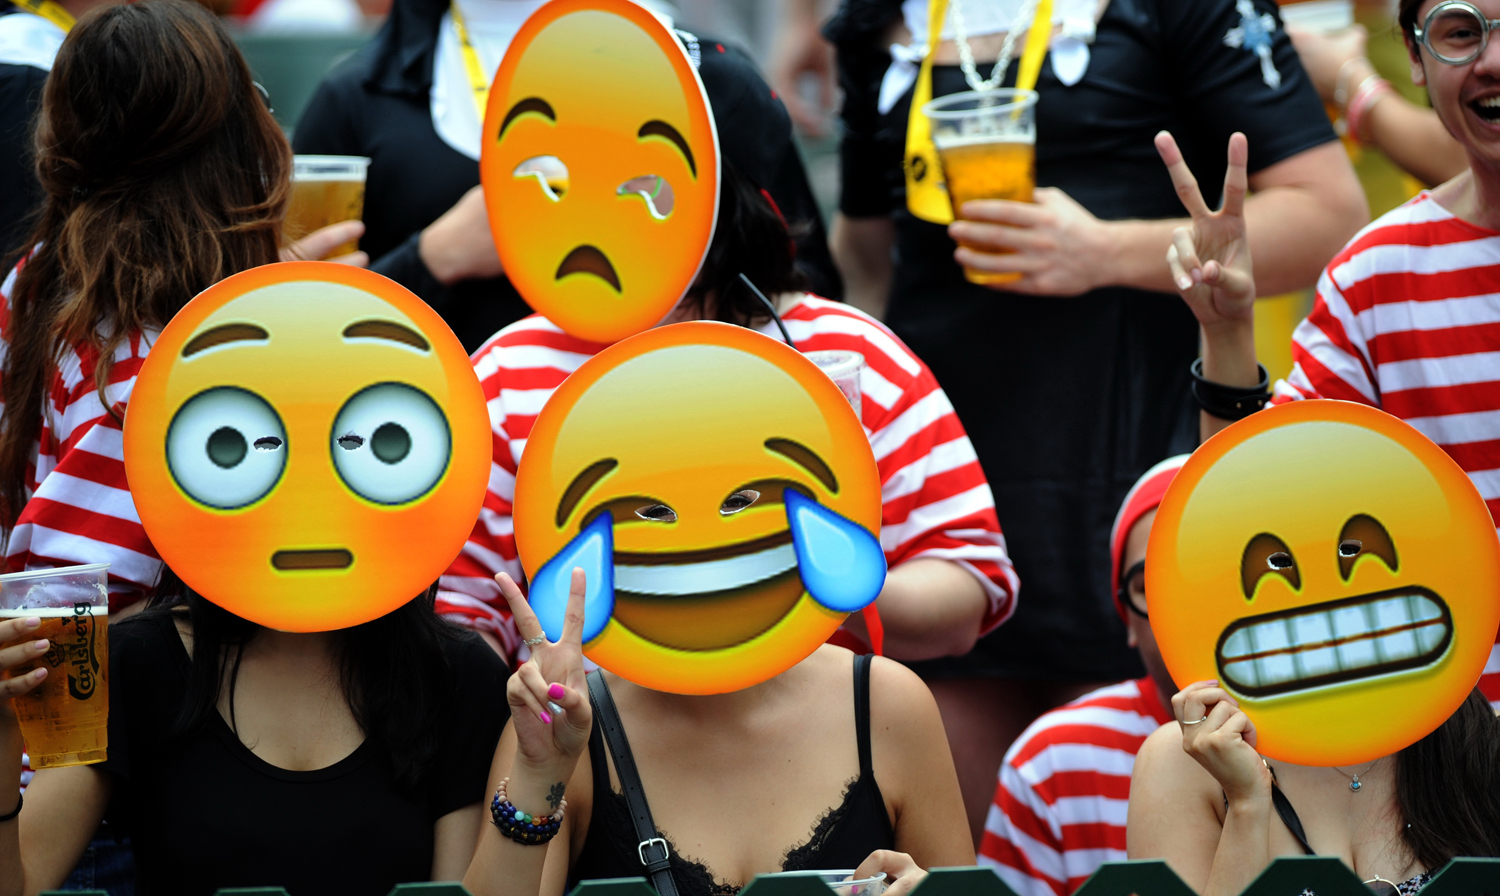 Fans wearing emoji masks watch a rugby match of the Hong Kong Seven in Hong Kong on March 28, 2015 (Stringer—AP)